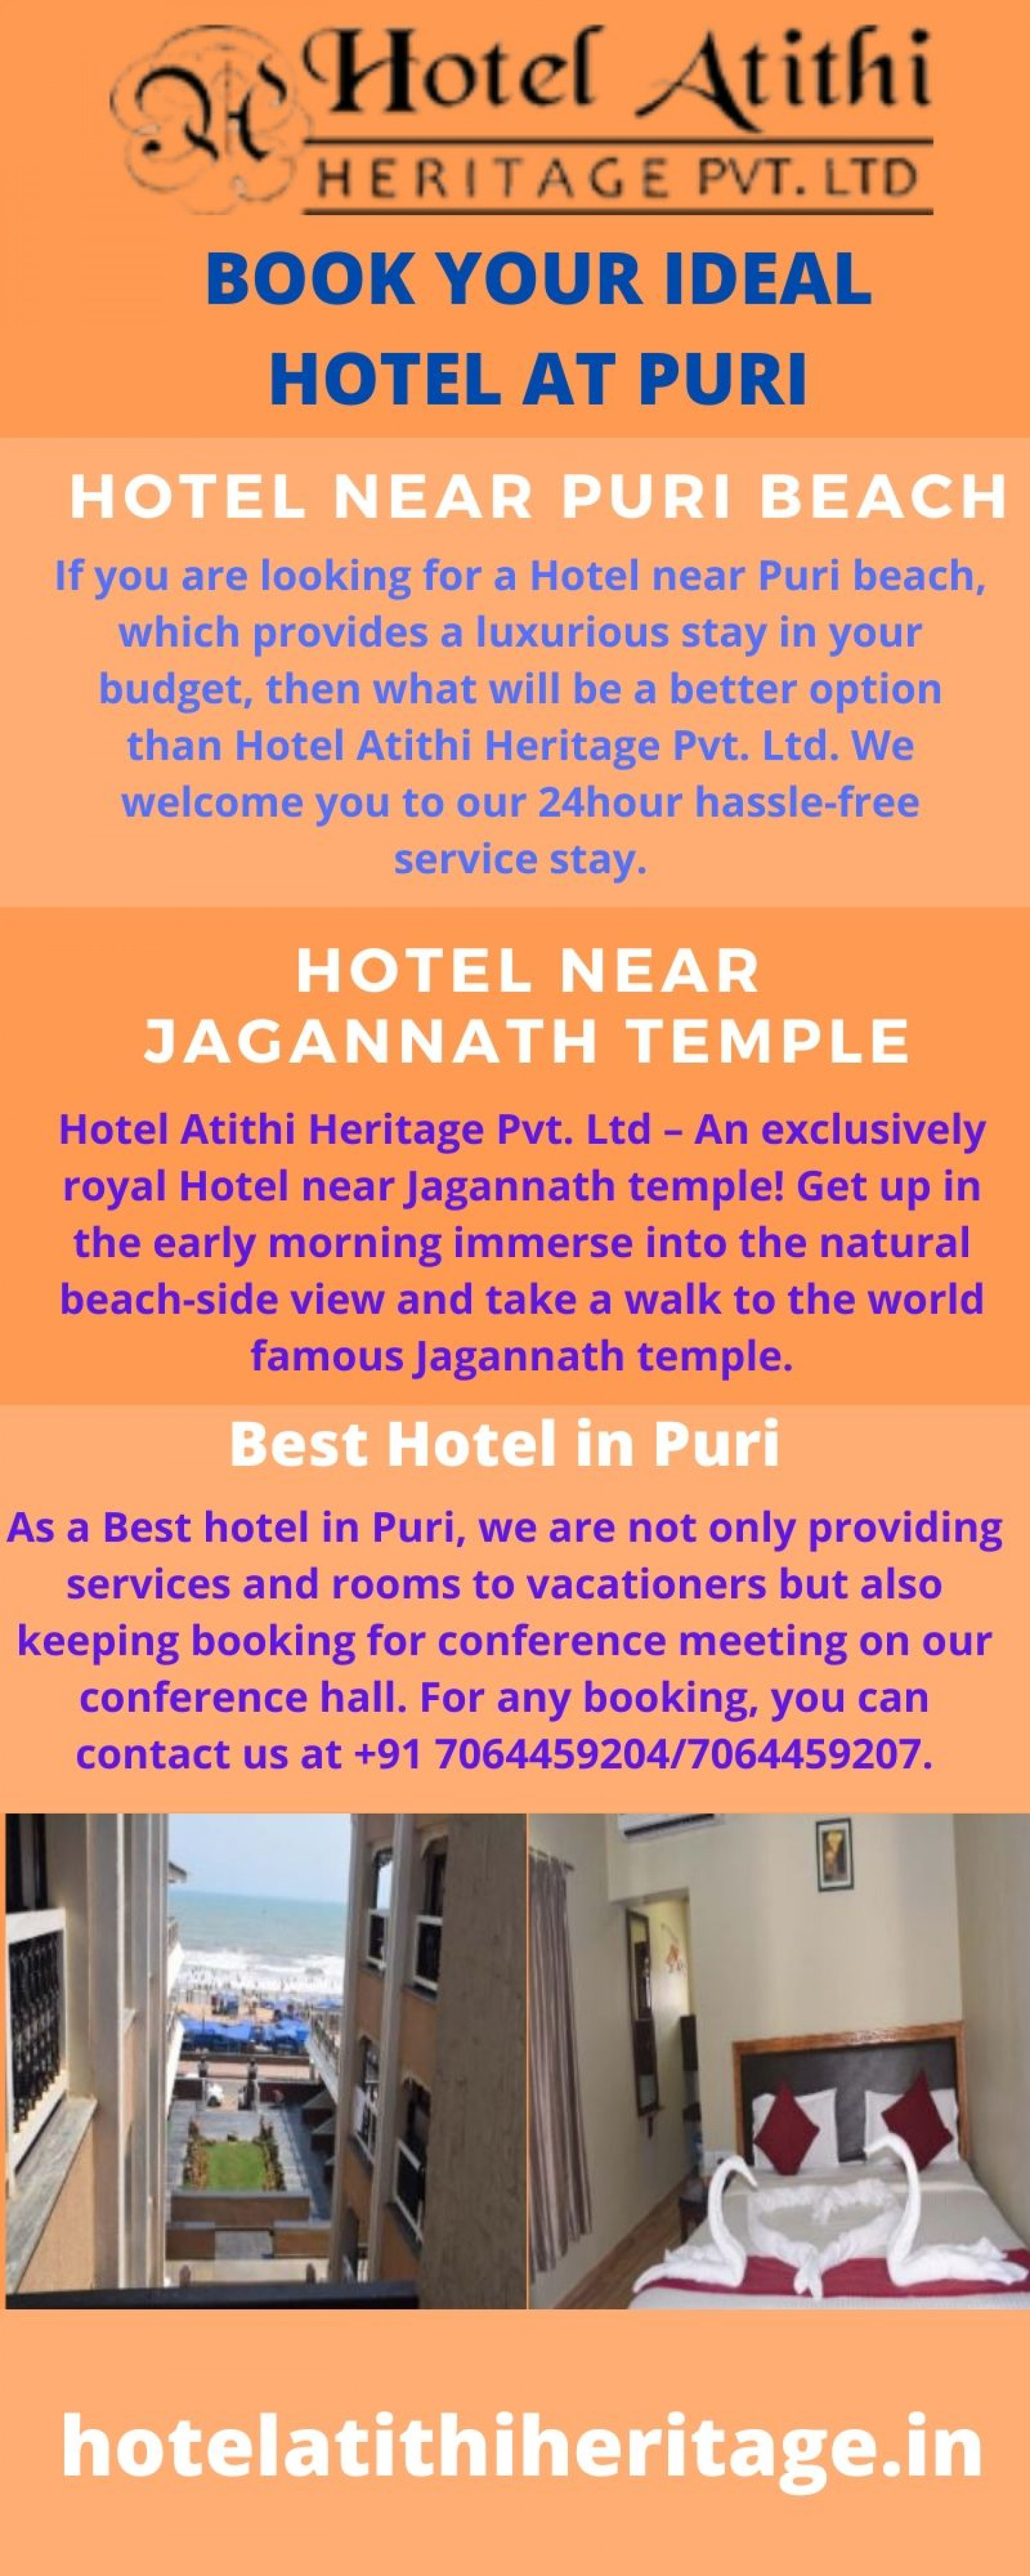 Book Your Ideal Hotel at Puri Infographic